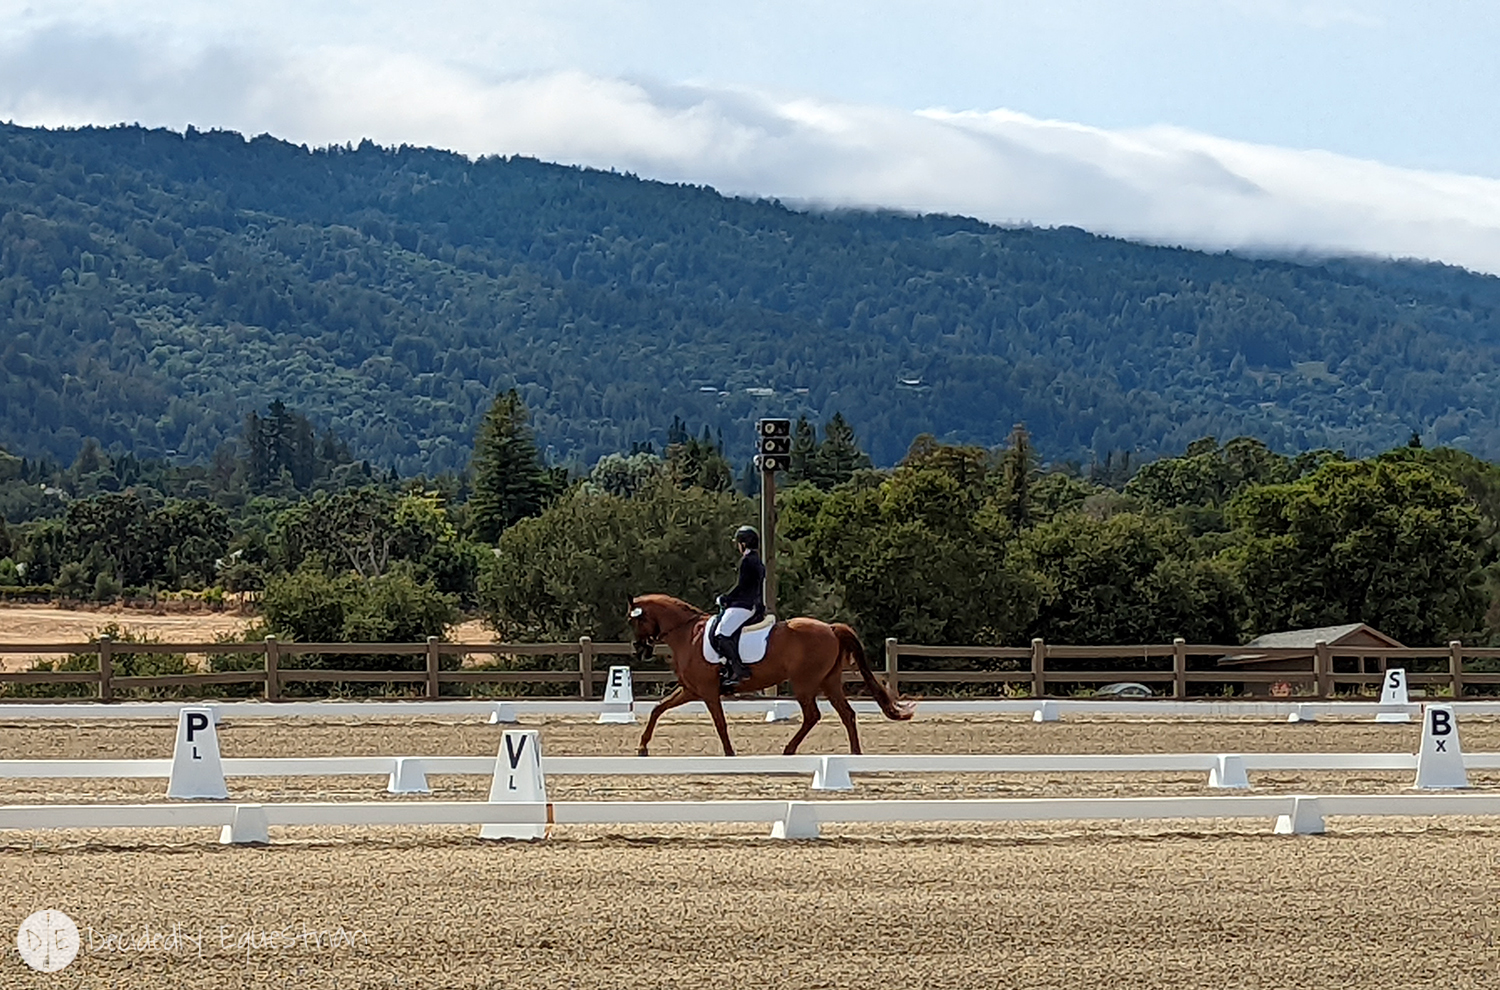 Decidedly Dressage: Taking the Longer View